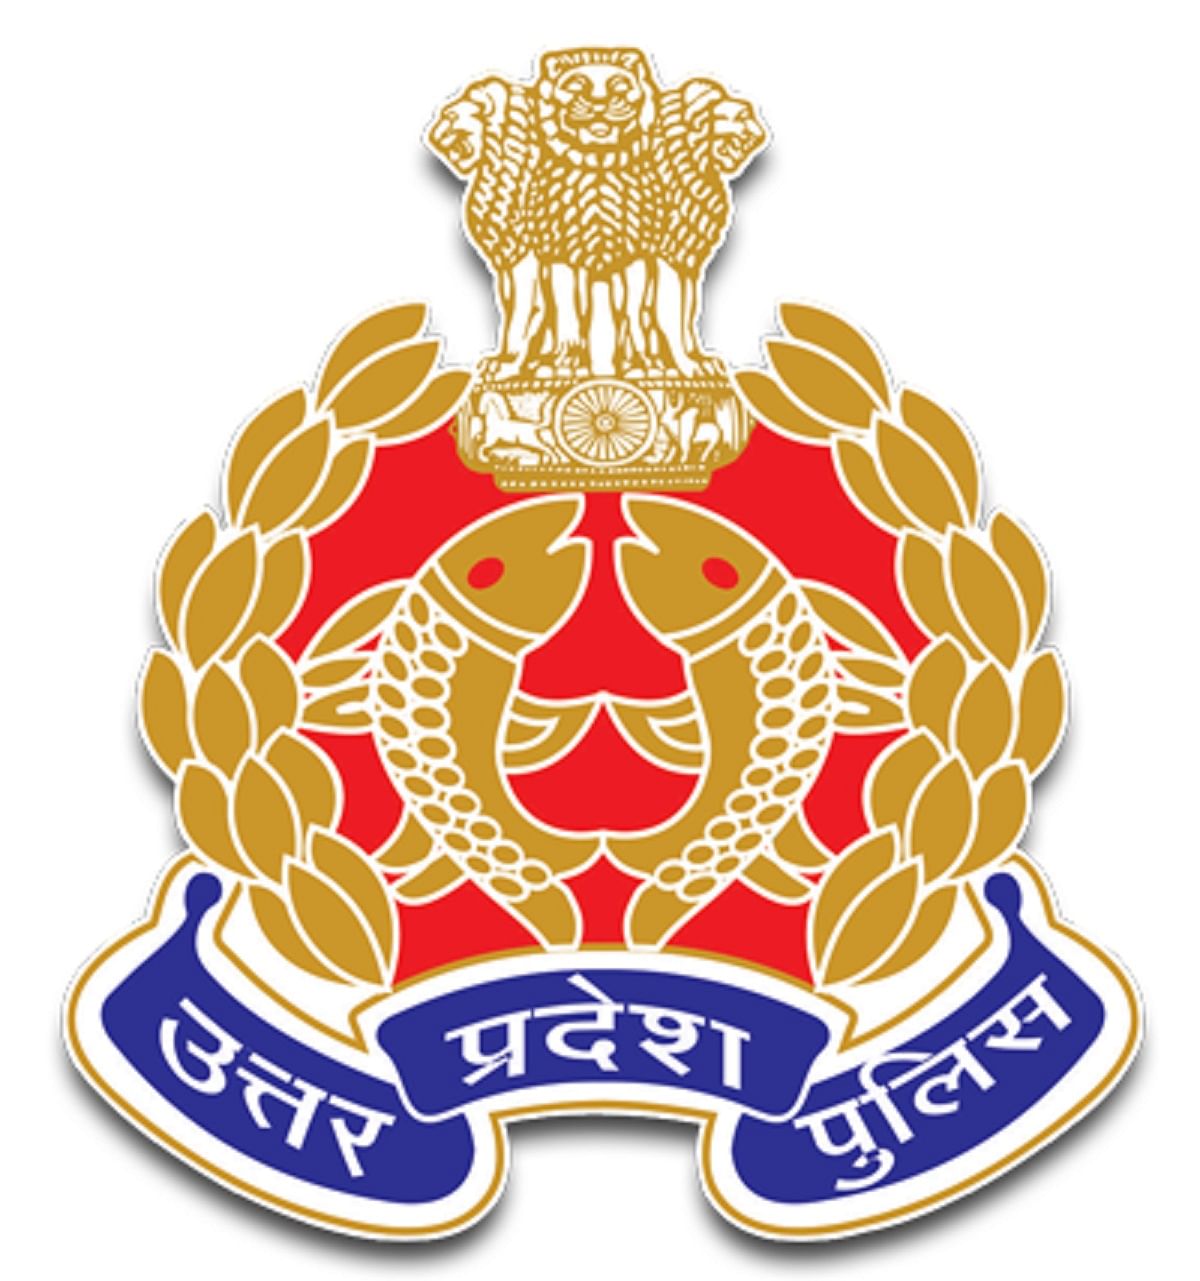 UP Police SI Exam Answer Key 2021 Released, Know How to Download Here